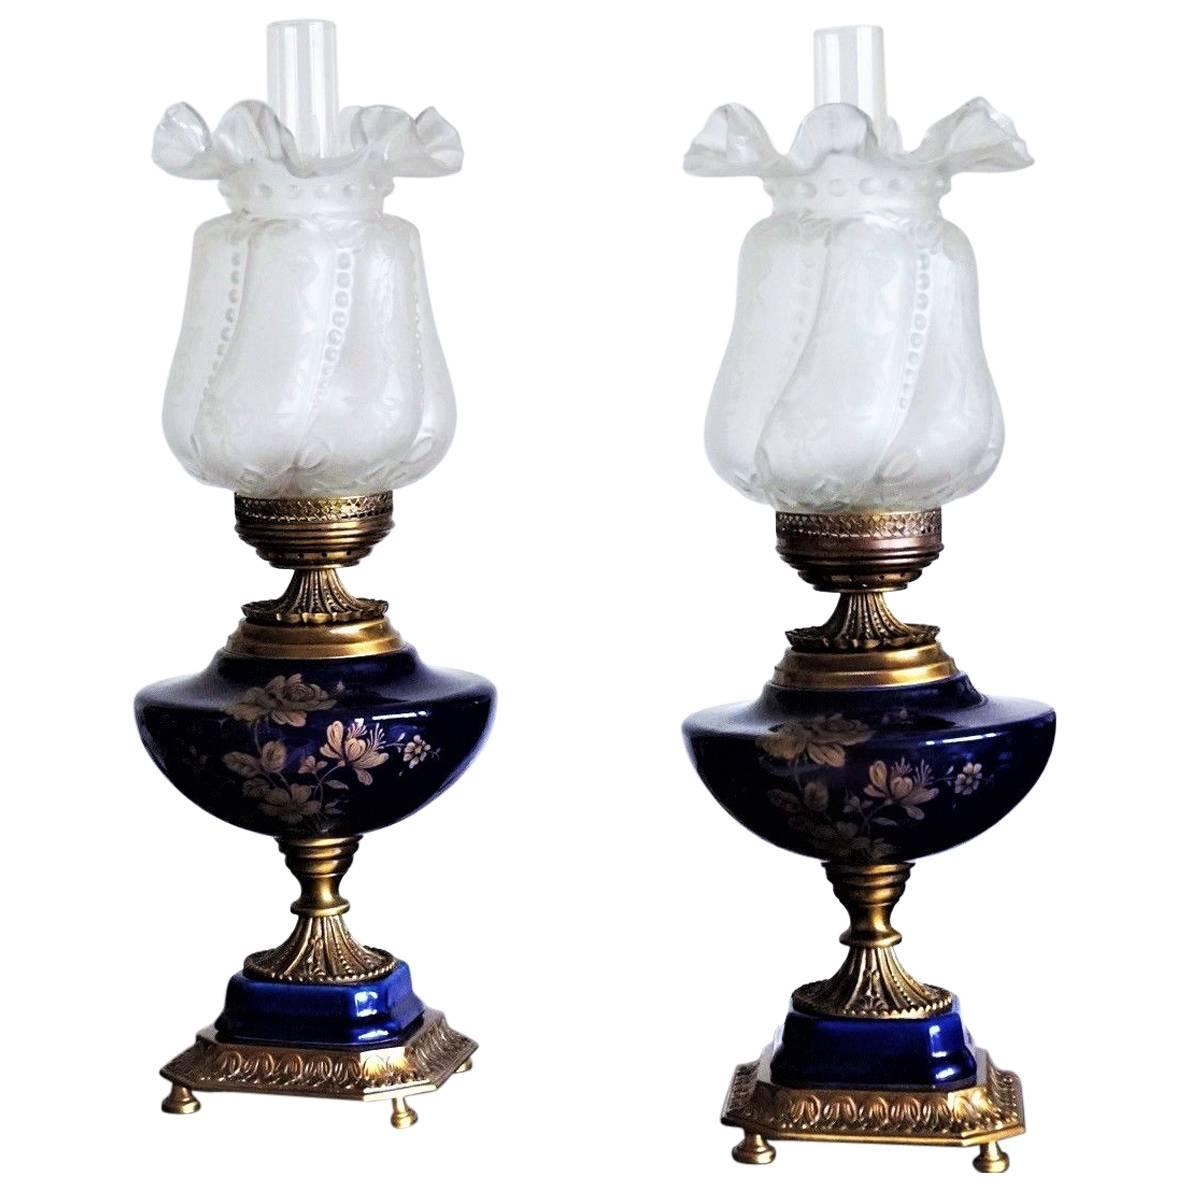 Pair of Italian vintage cobalt blue porcelain and brass vase table lamps, on one side hand painted gilded floral decor, with high relief etched glass shades and glass chimneys, circa 1960

Very good condition, no chips or cracks, brass with signs